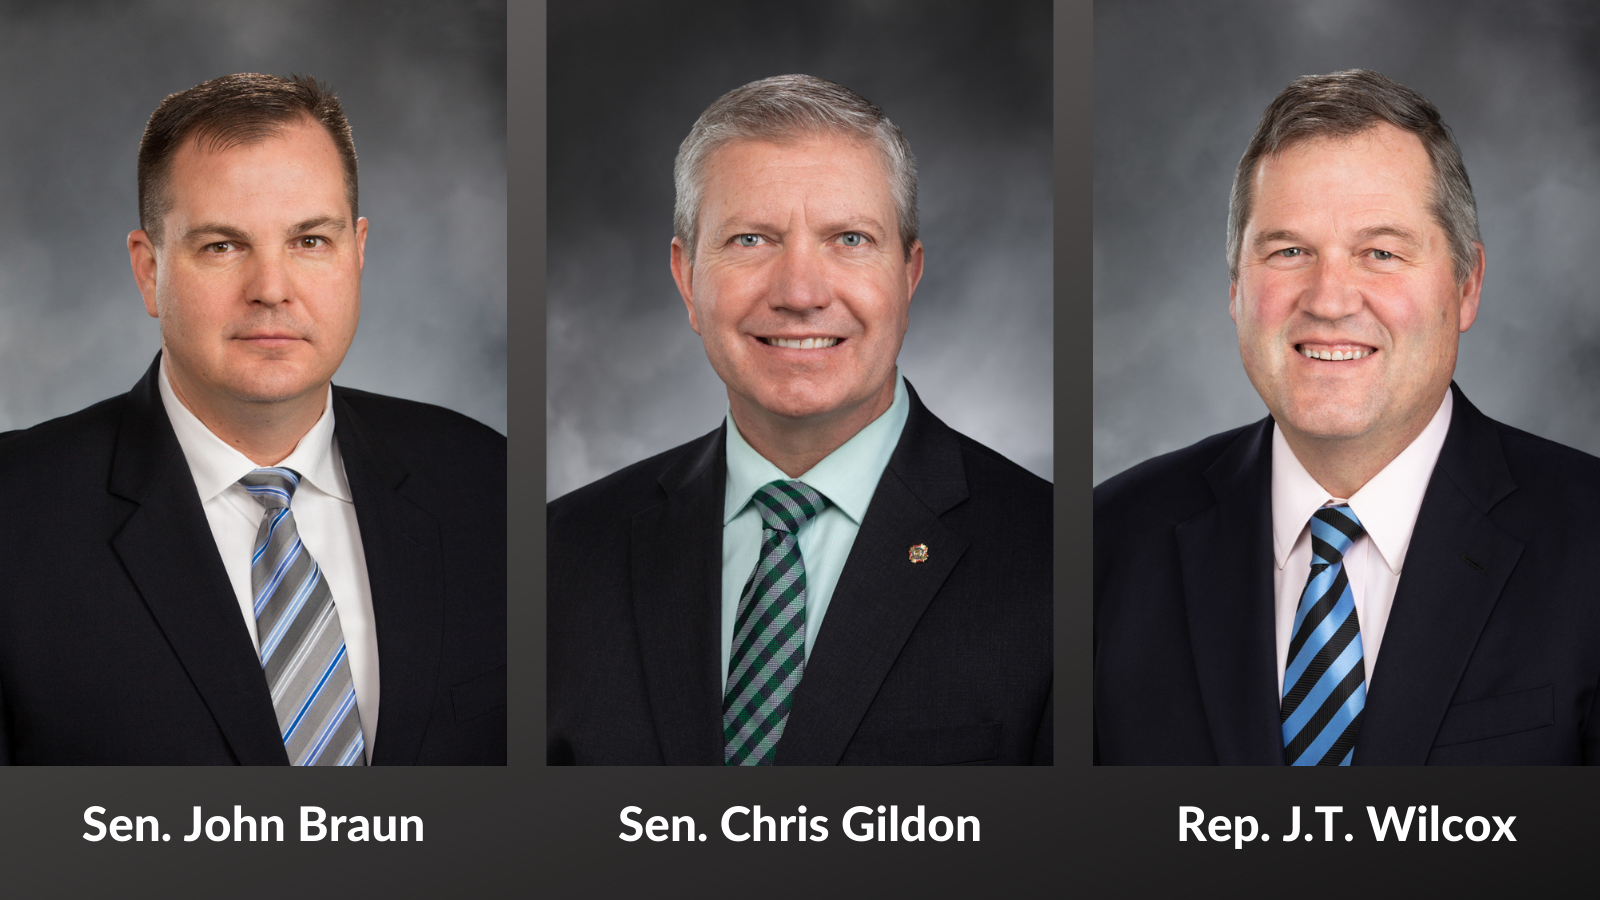 AUDIO: Legislative Republicans respond to Governor, lay out goals for session